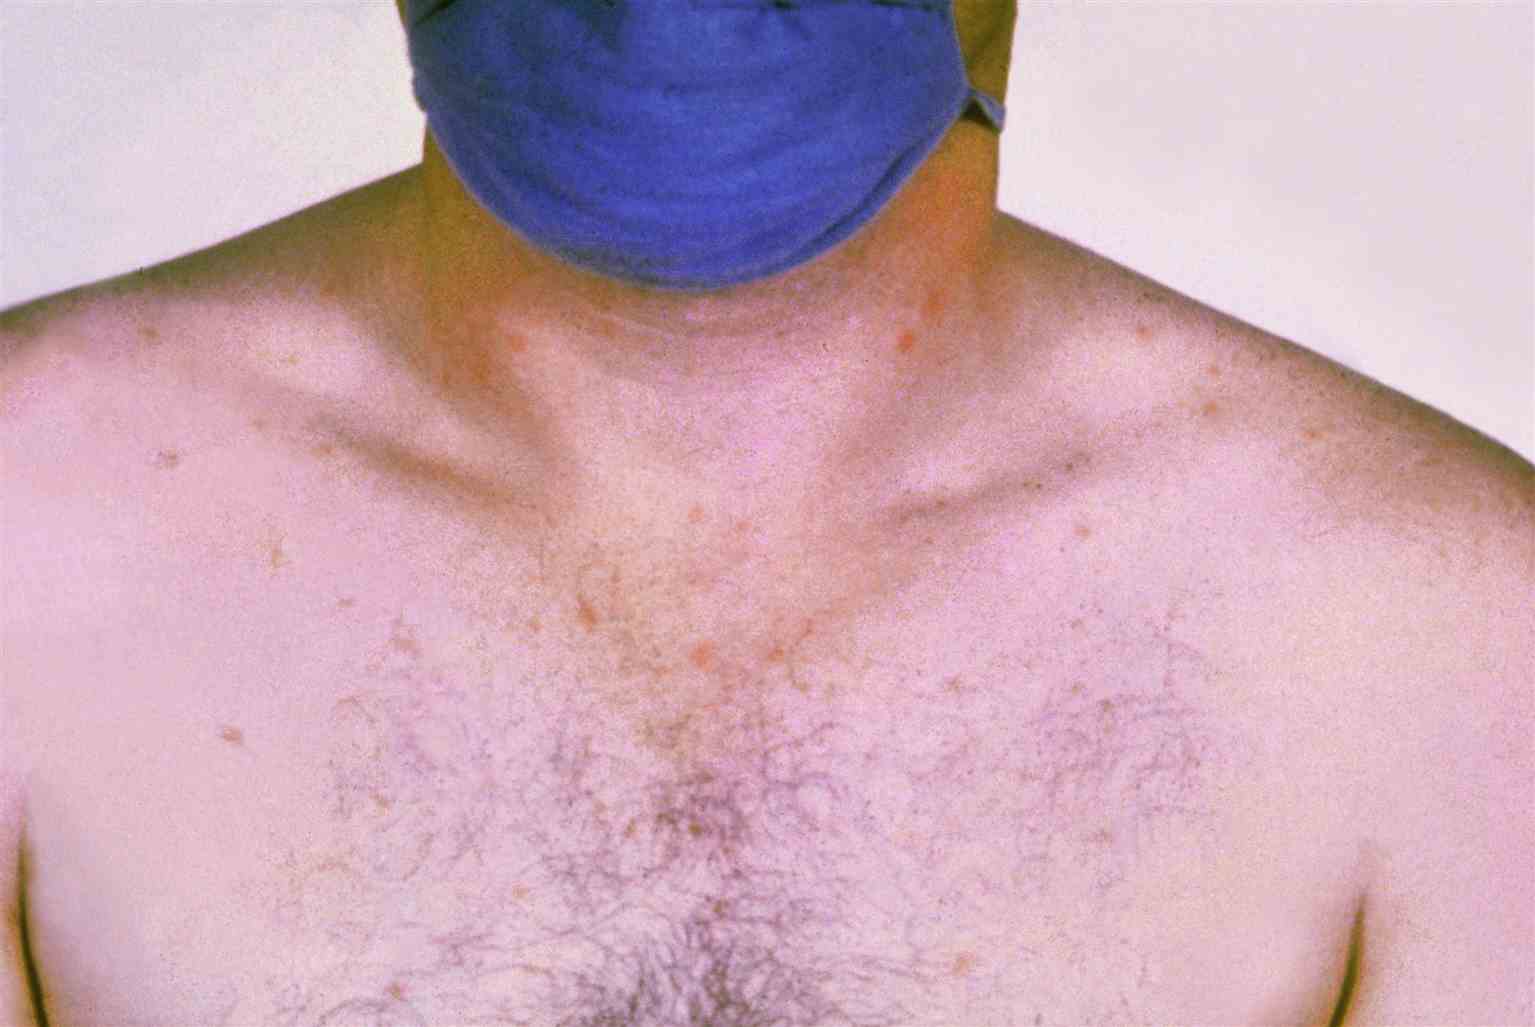 Rose spots on the chest of a patient with typhoid fever due to the bacterium Salmonella typhi. Symptoms of typhoid fever may include a sustained fever as high as 103 to 104 F (39 to 40 C), weakness, stomach pains, headache, loss of appetite. In some cases, patients have a rash of flat, rose-colored spots.